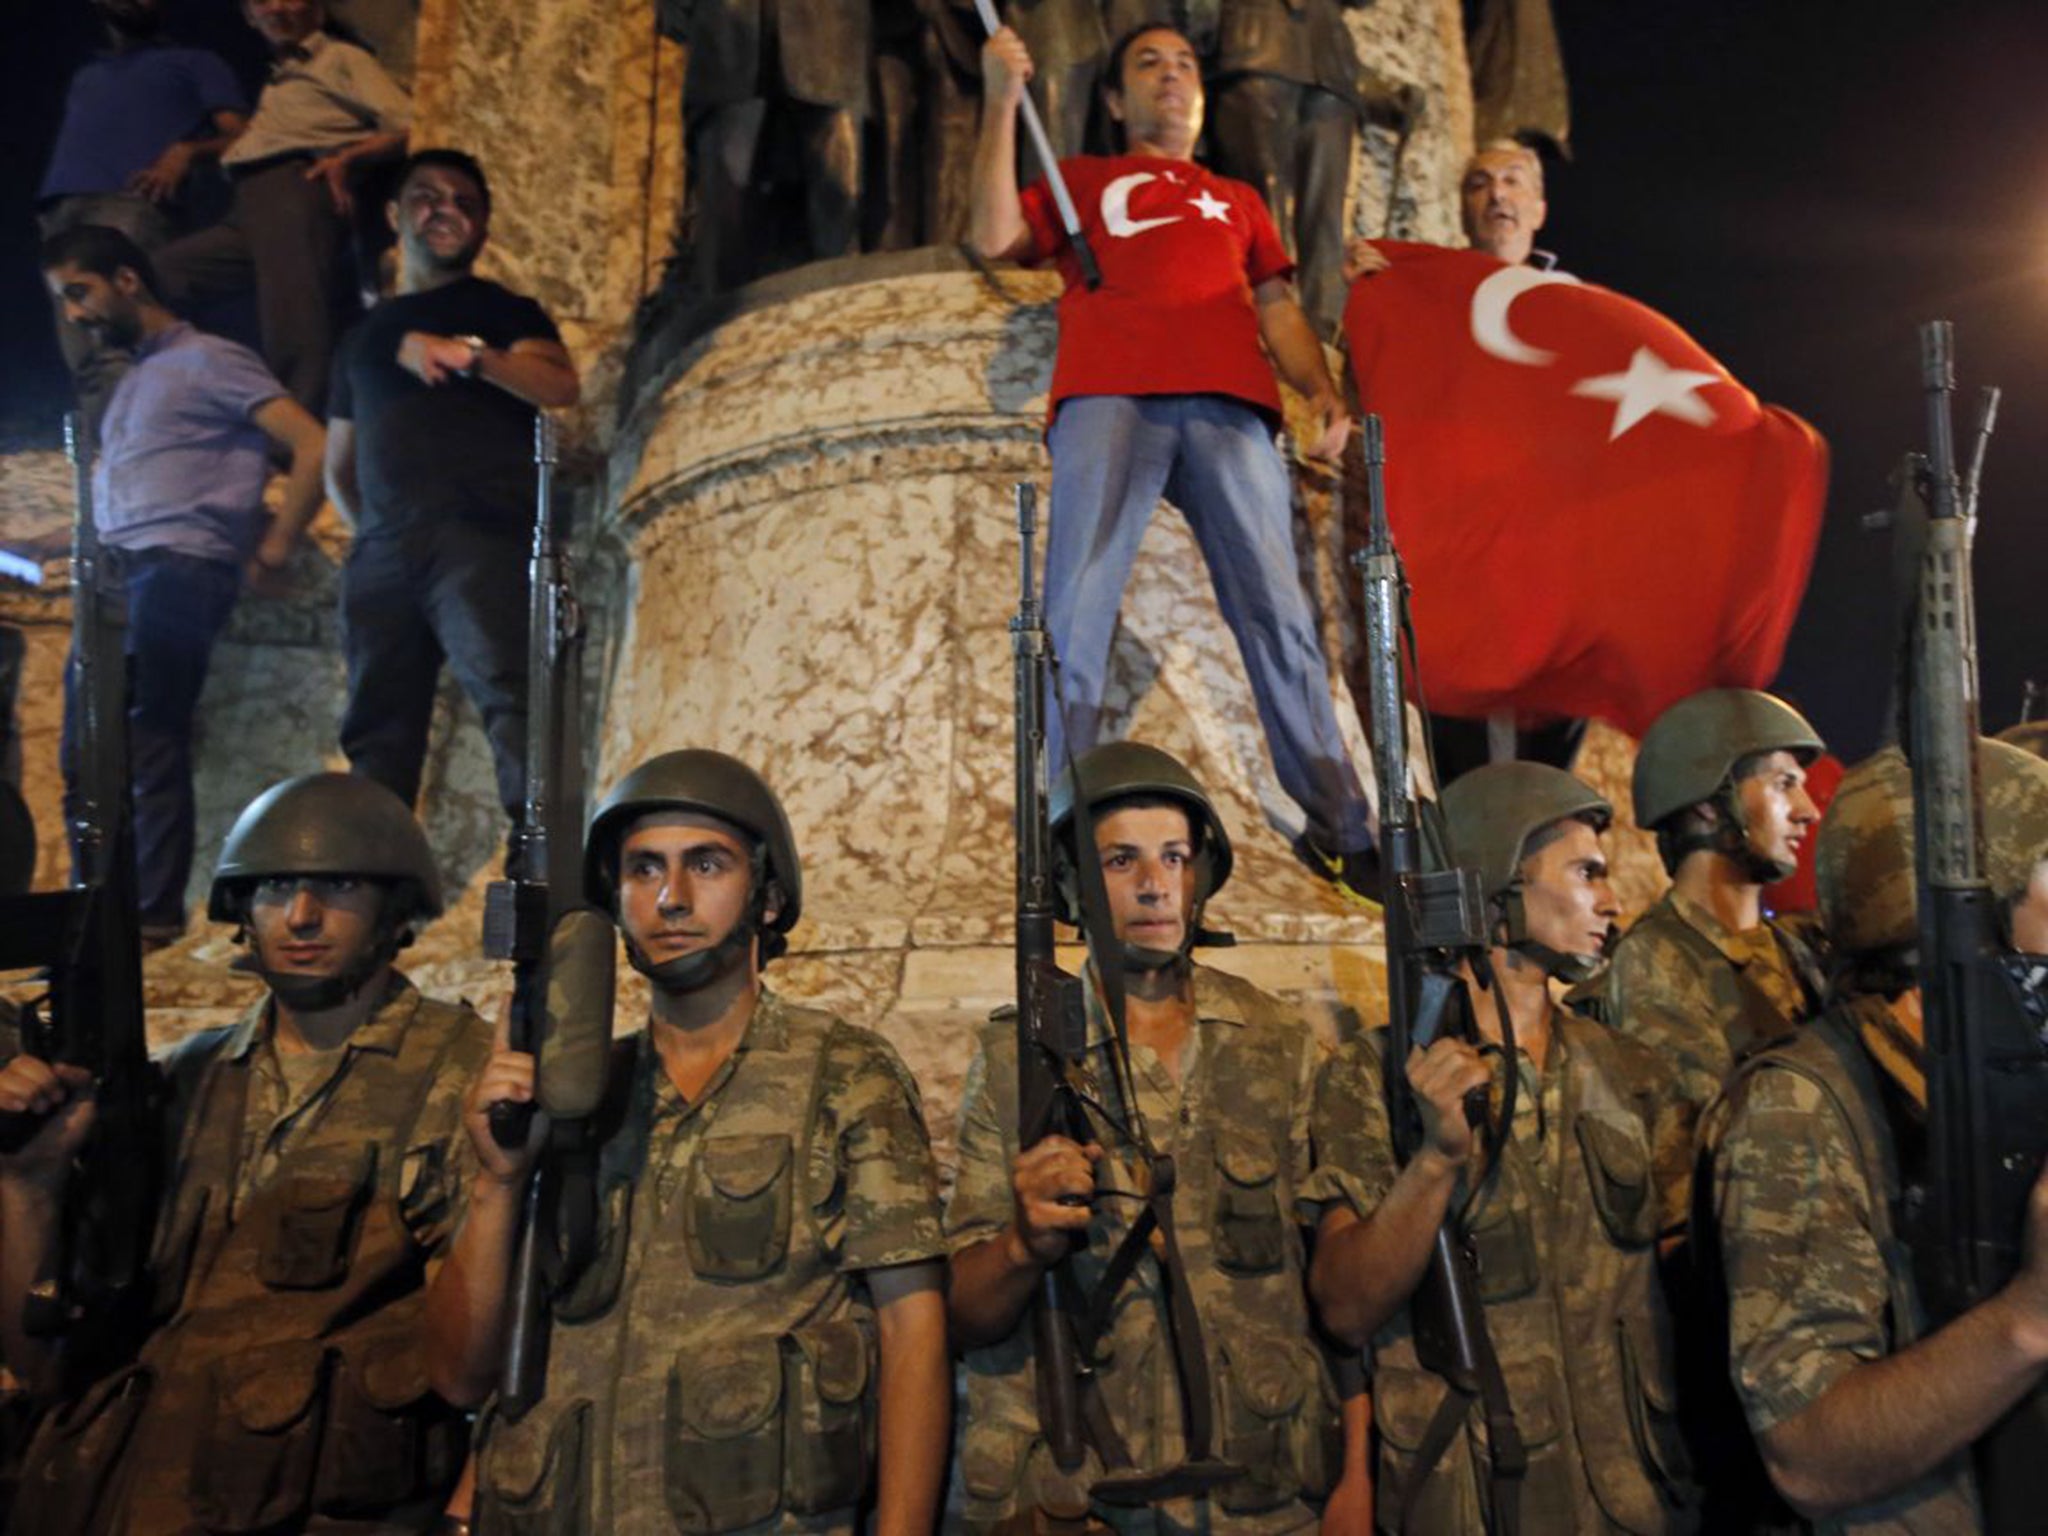 Turkish soldiers secure the area as supporters of Recep Tayyip Erdogan protest in Istanbul's Taksim square